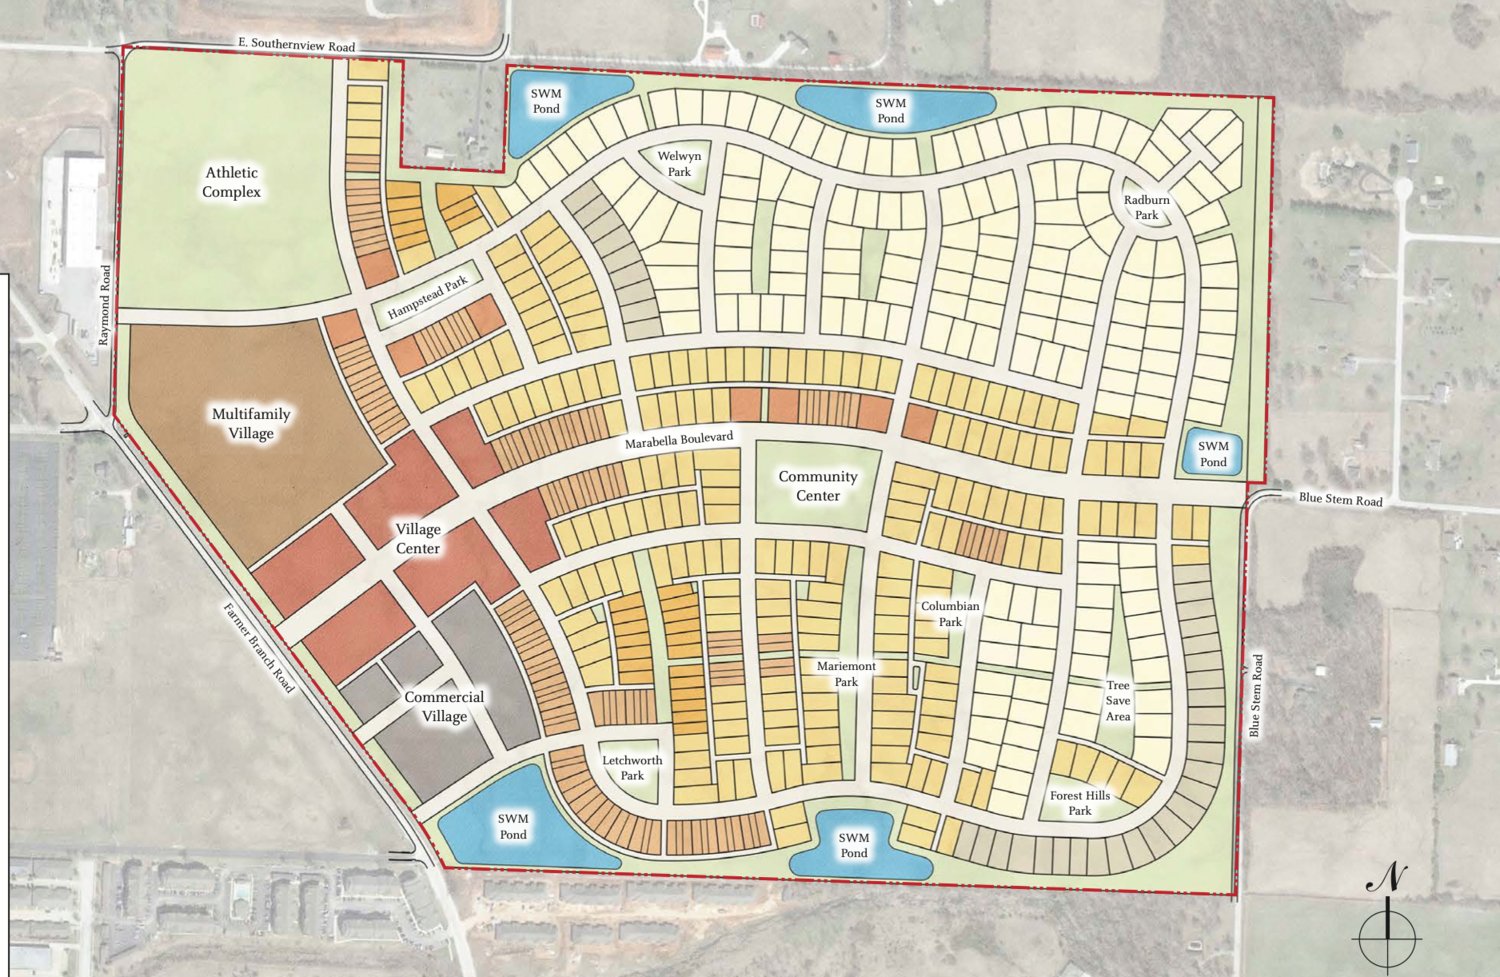 UNDER CONSIDERATION: The master plan for Marabella, a proposed 864-unit residential and commercial development in Ozark, is under review by city officials.